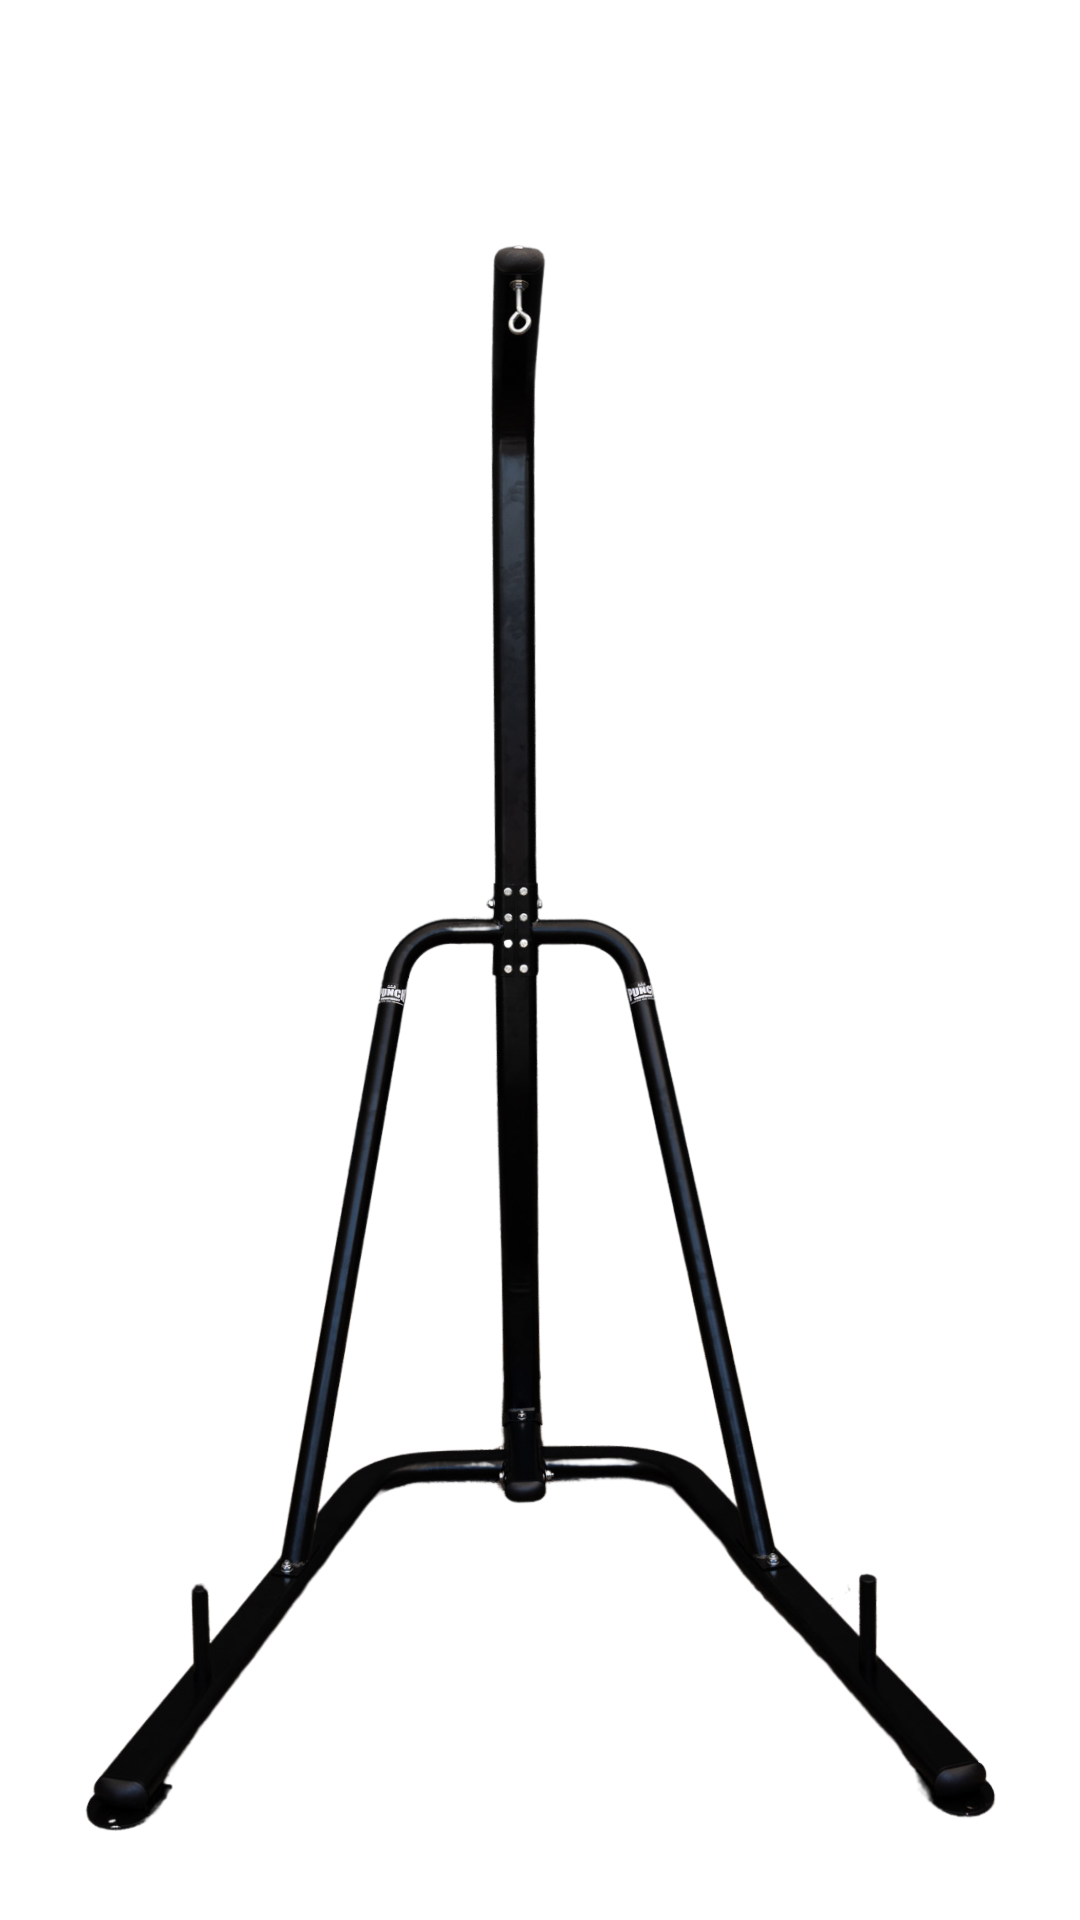 Punch Boxing Bag Stand - Up To 5ft Bag - Tube